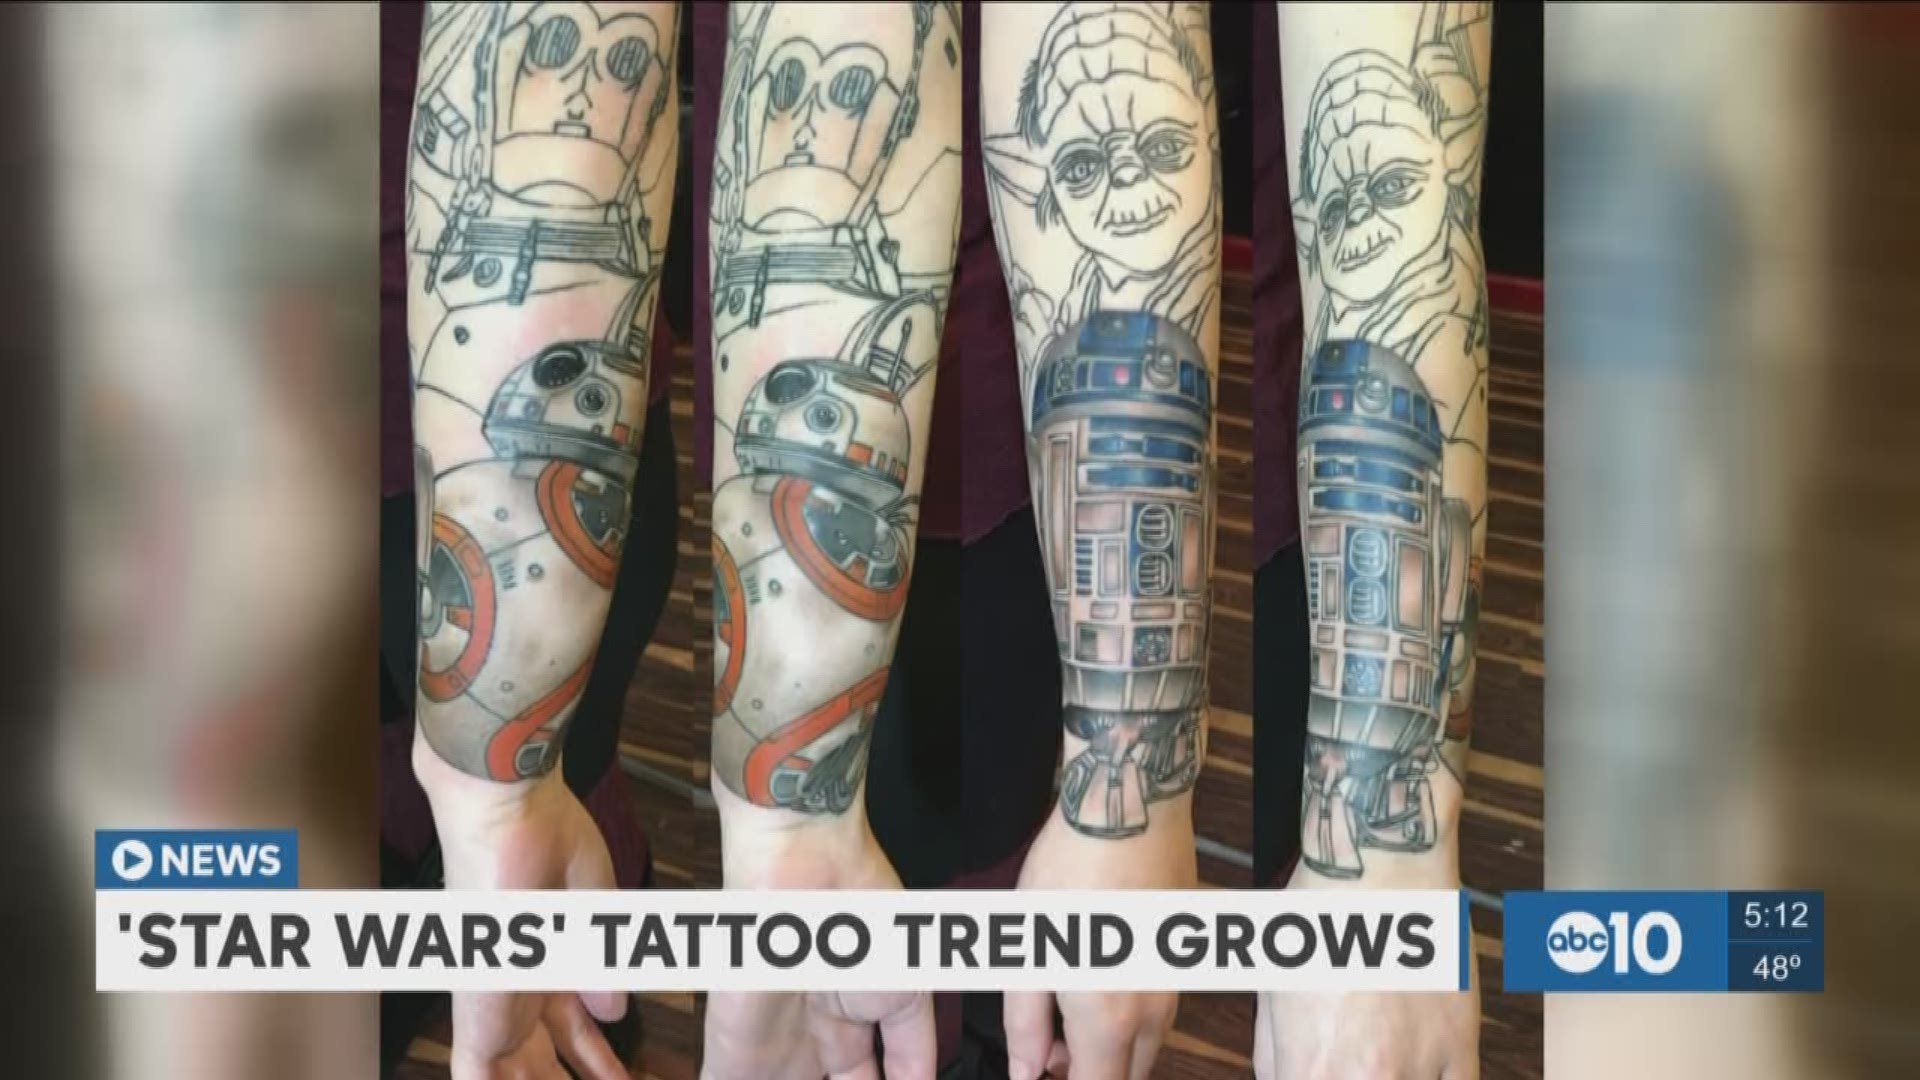 From Tatooine to tattooing: 'Star Wars' tats take off in Vacaville |  